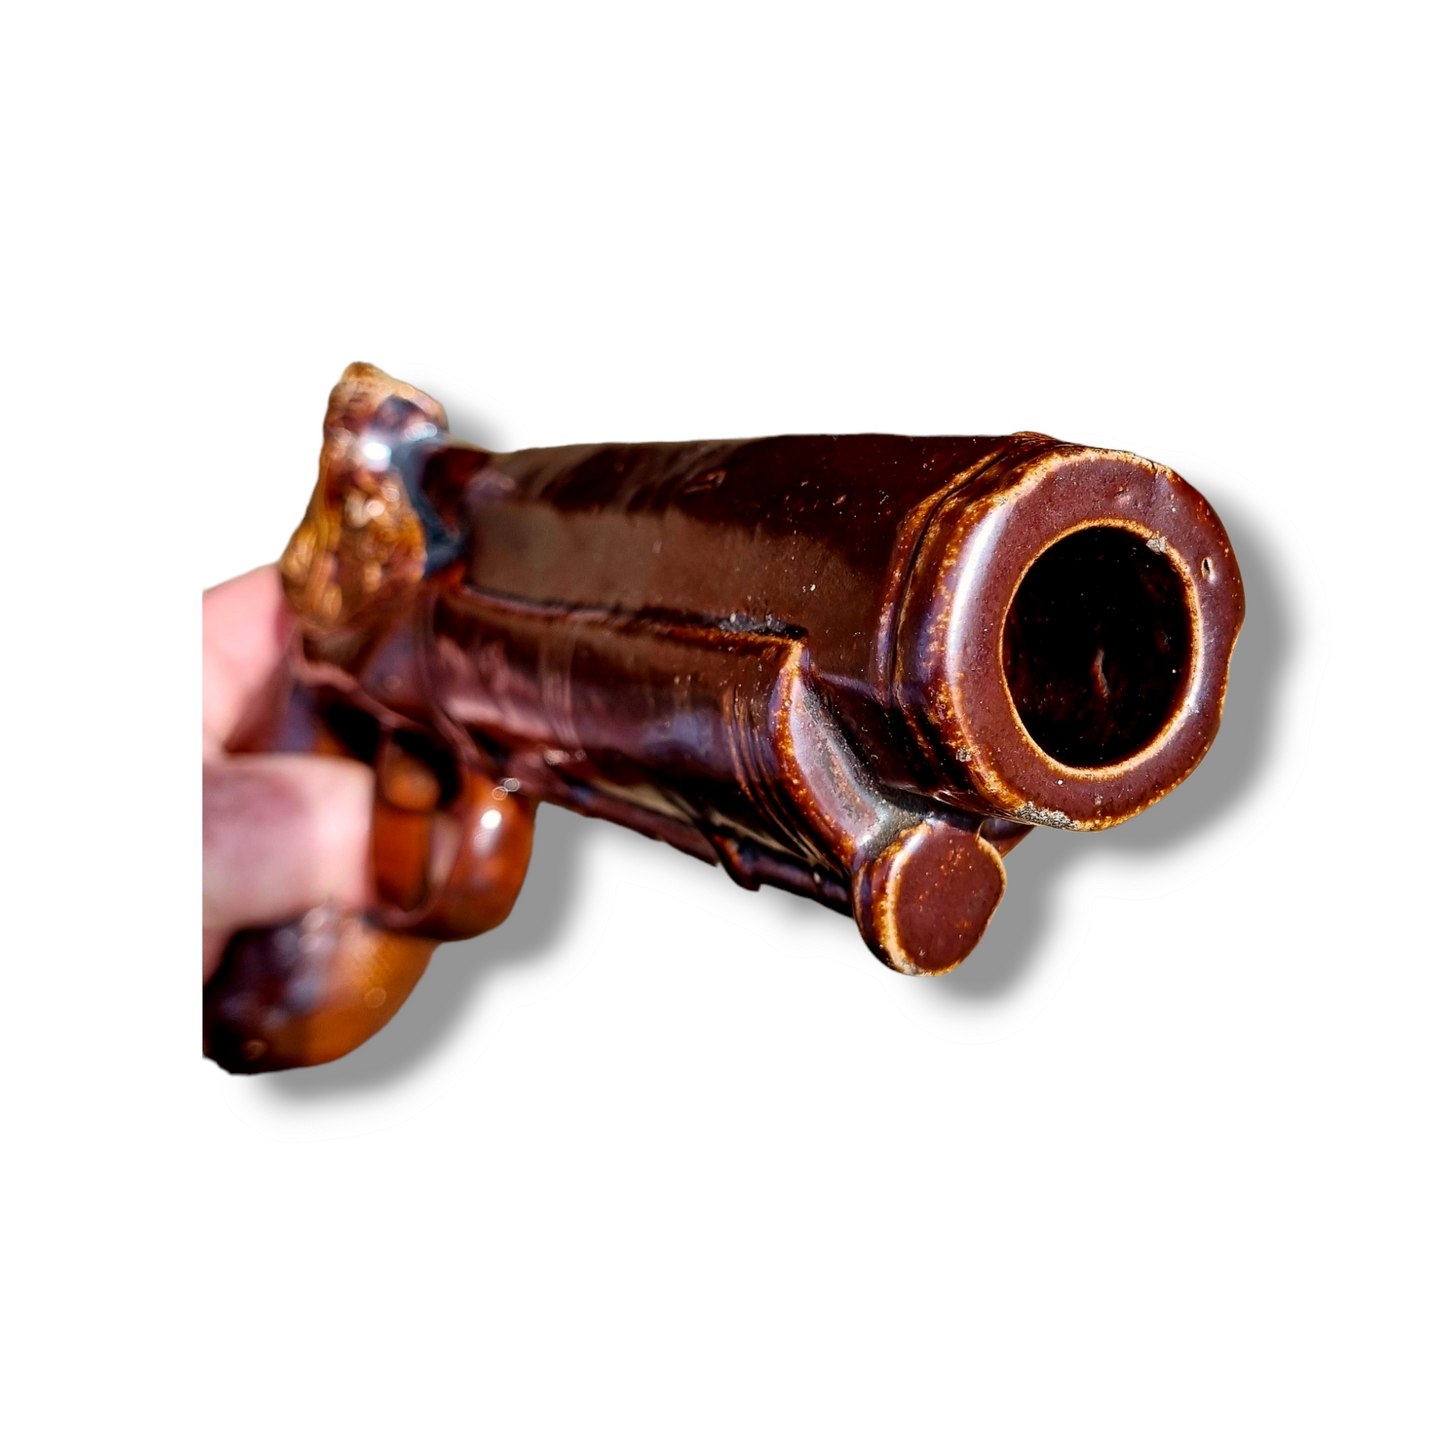 19th Century English Antique Salt-glazed Stoneware Pottery Pistol-Shaped Whisky Flask by Stephen Green, Imperial Potteries, Lambeth, London, Circa 1831-1858